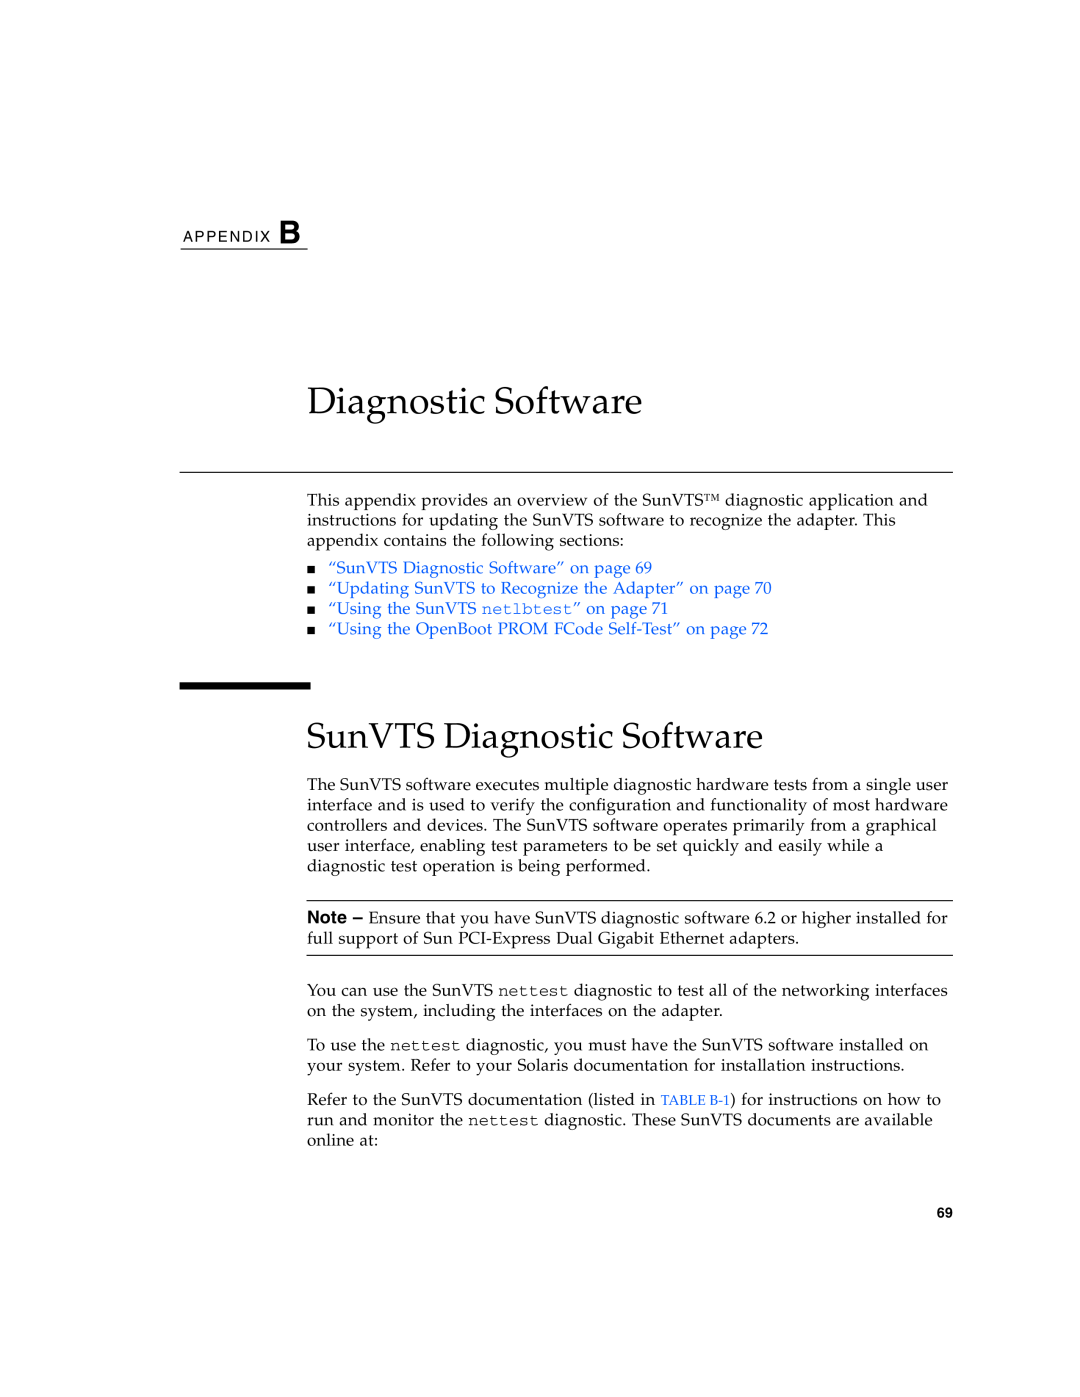 Sun Microsystems Gigabit Ethernet MMF/UTP Adapter manual “SunVTS Diagnostic Software” on page 